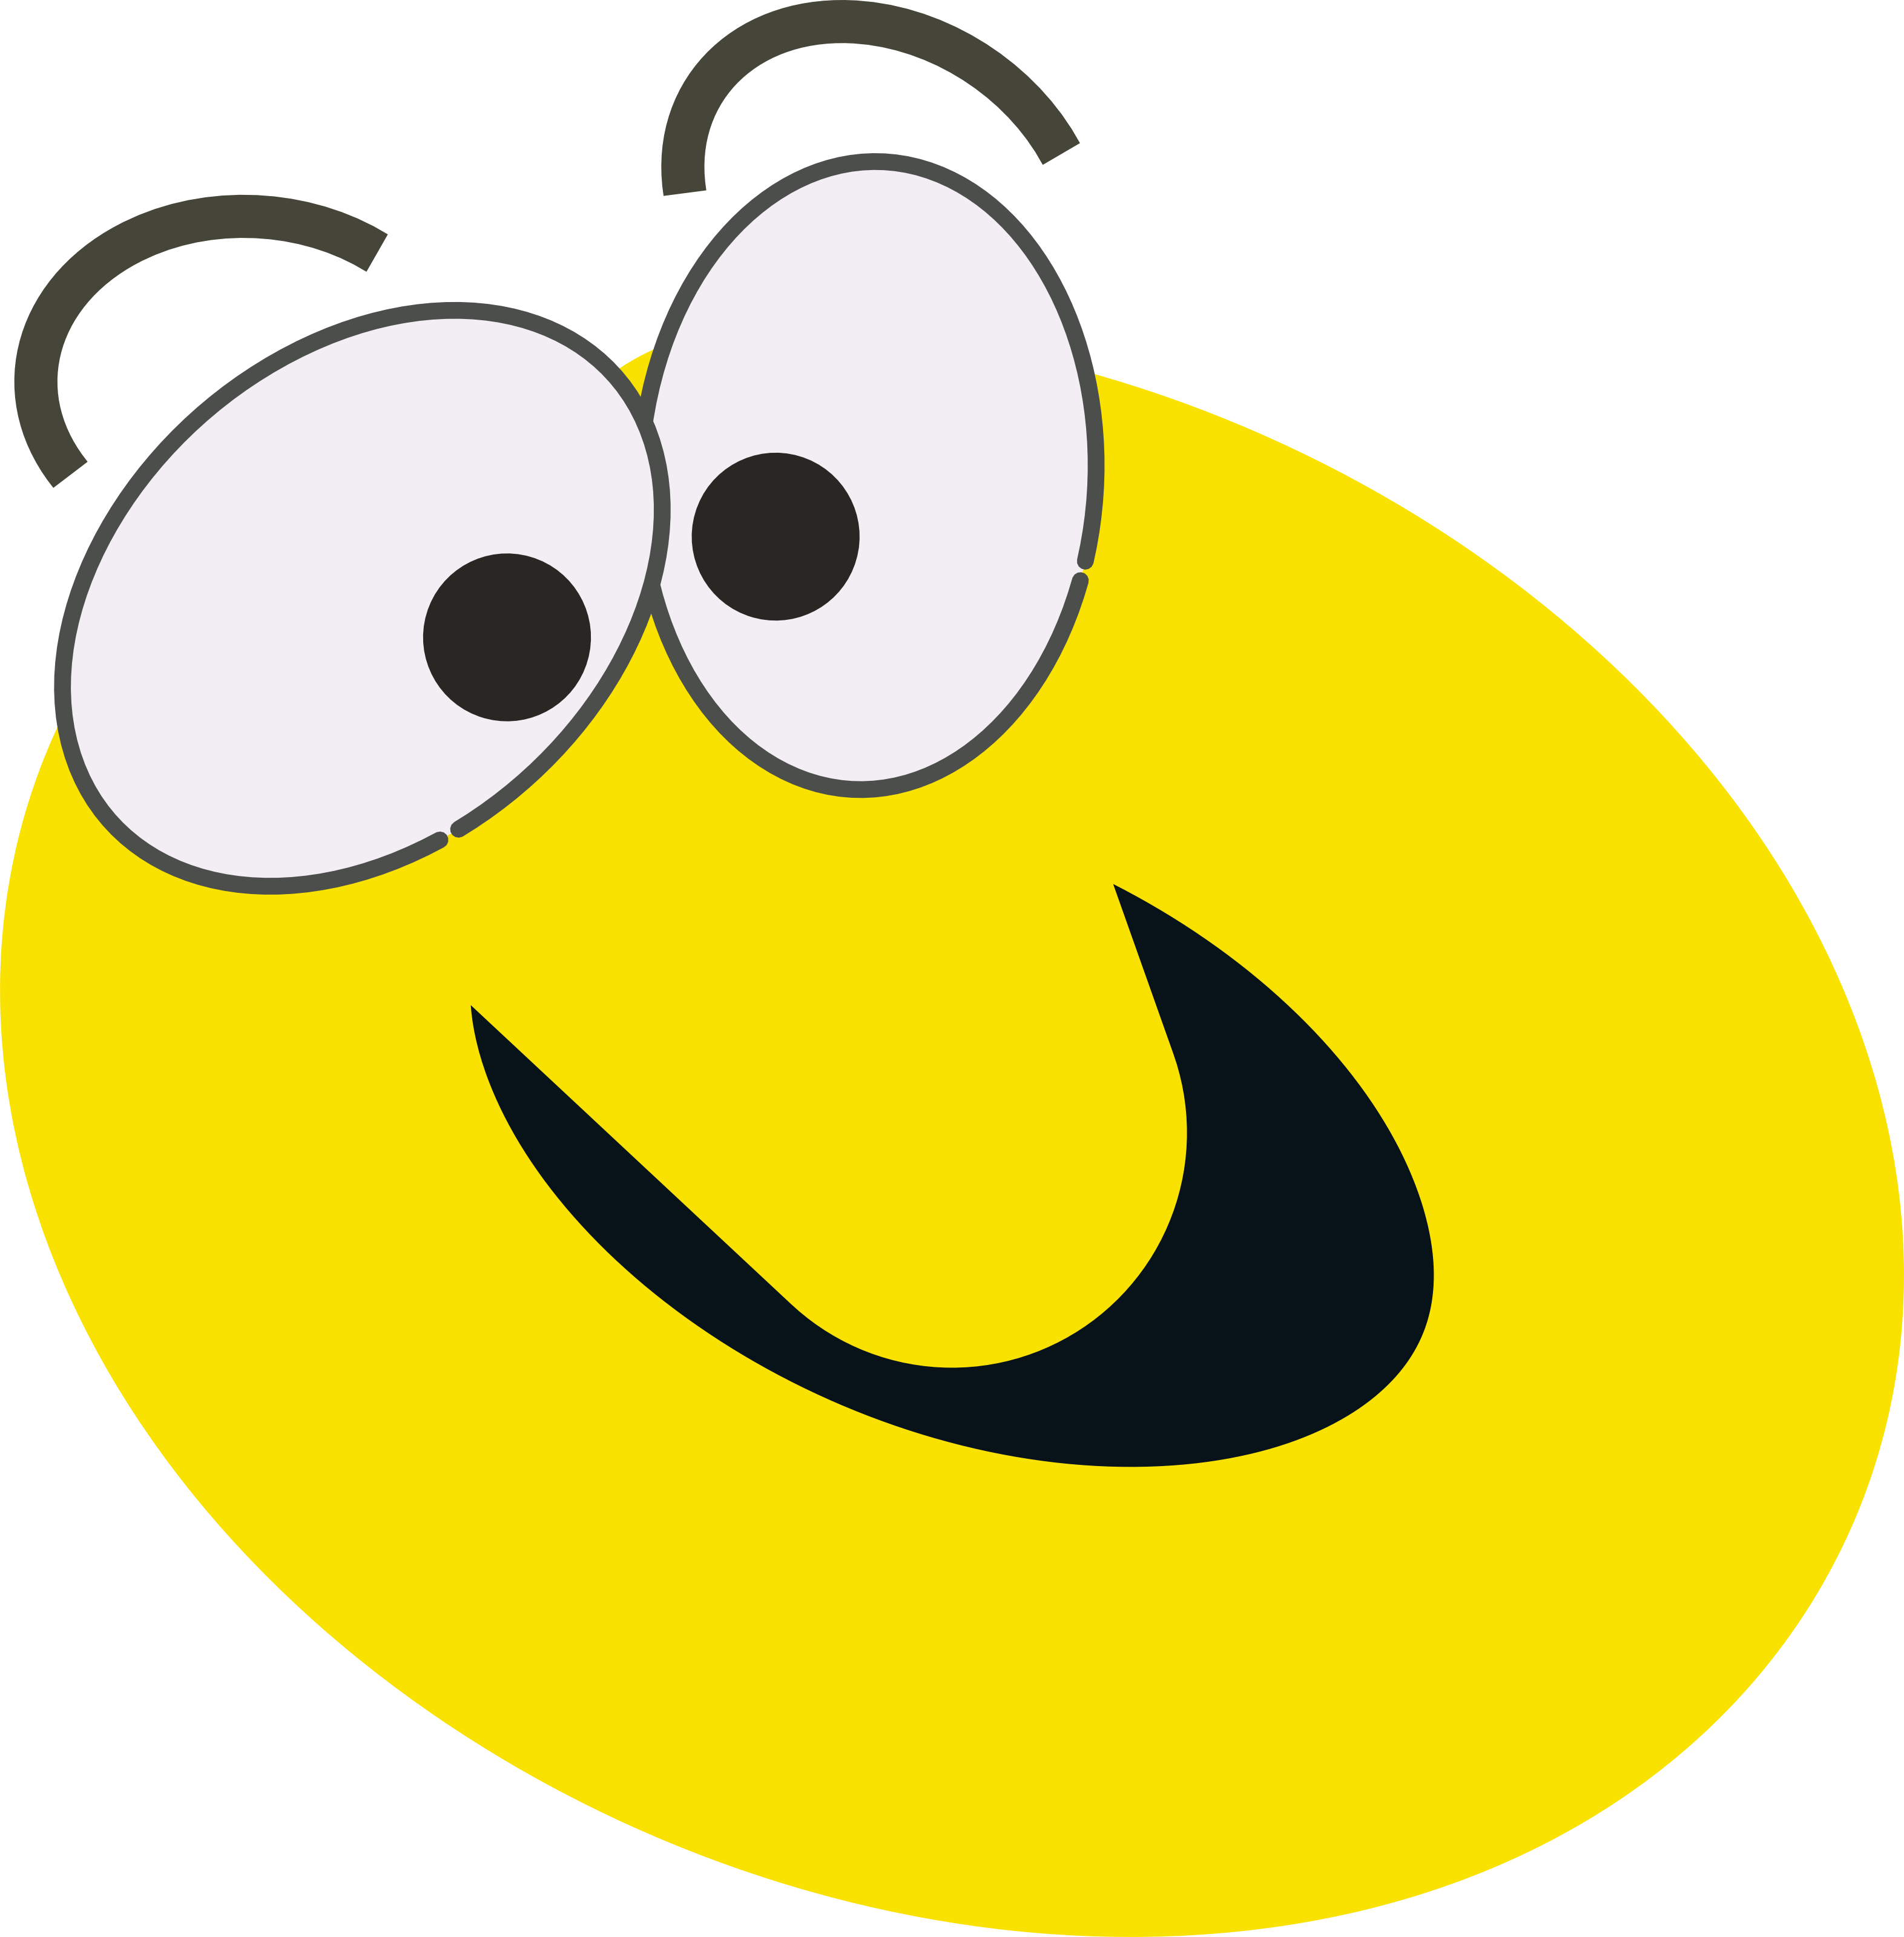 Smiley face clip art animated - Animated Clipart Free